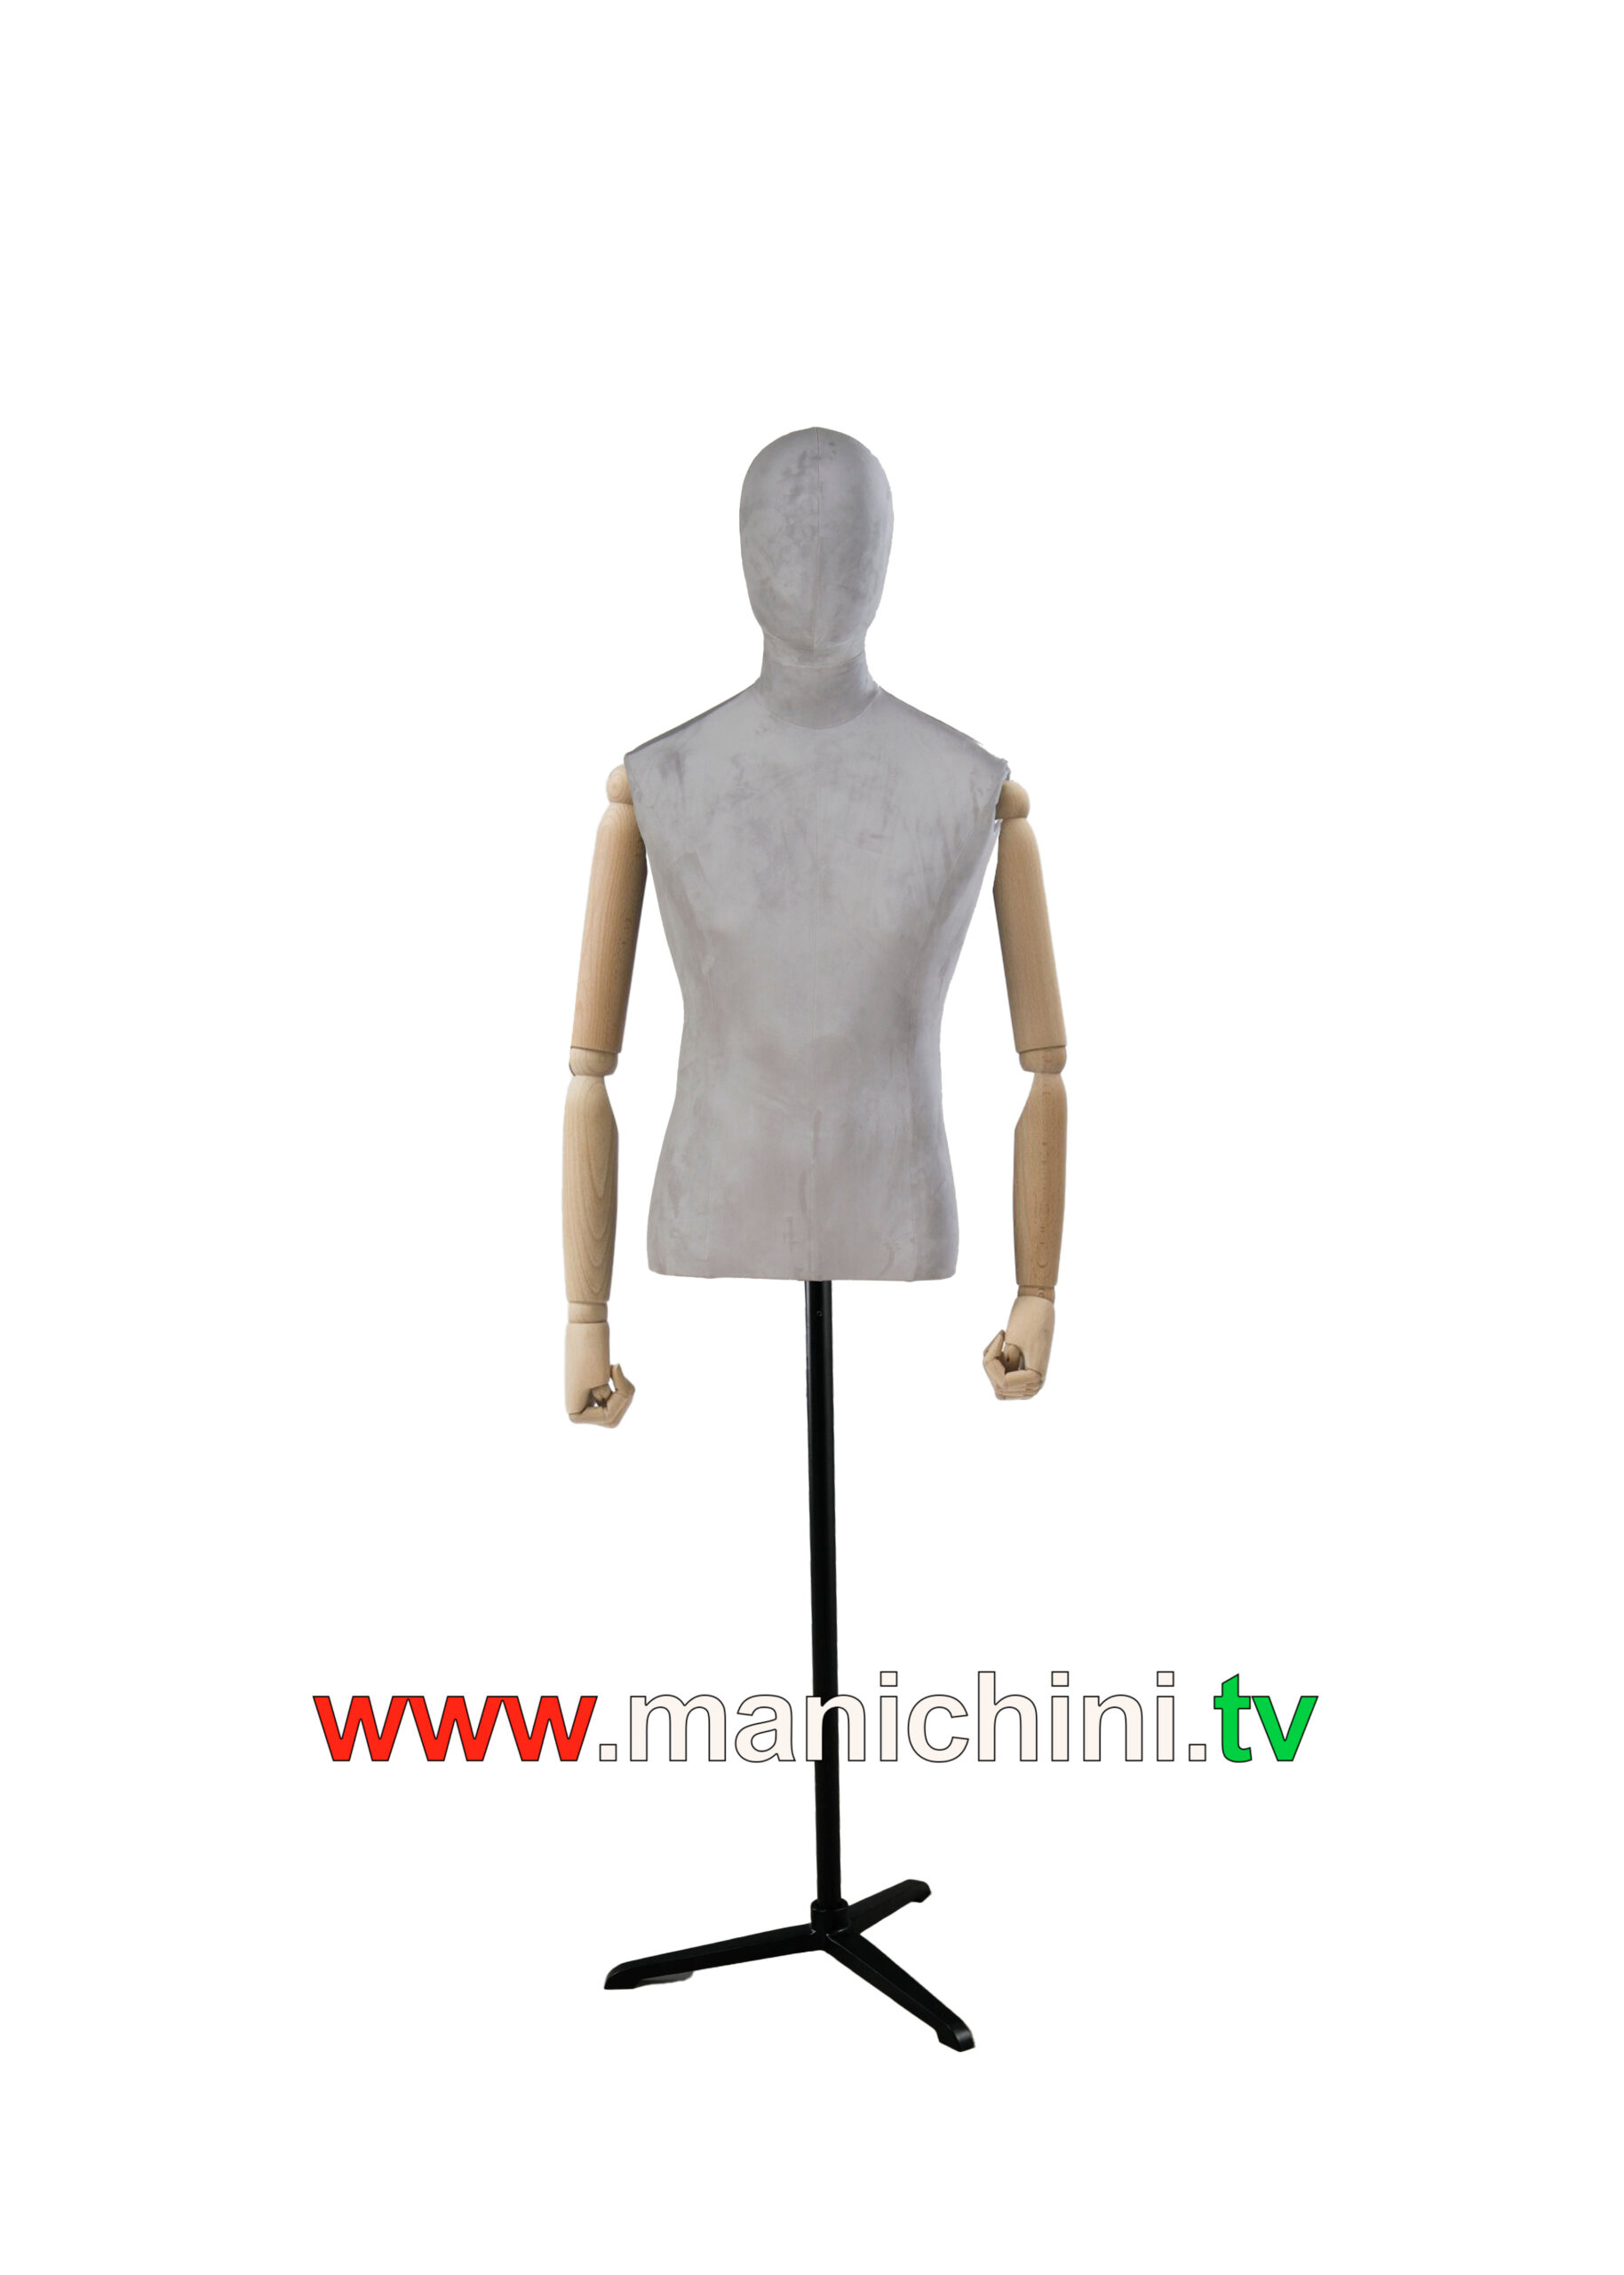 Velvet Upholstered Busts Bust Woman Tailored White Wooden Arms with Head